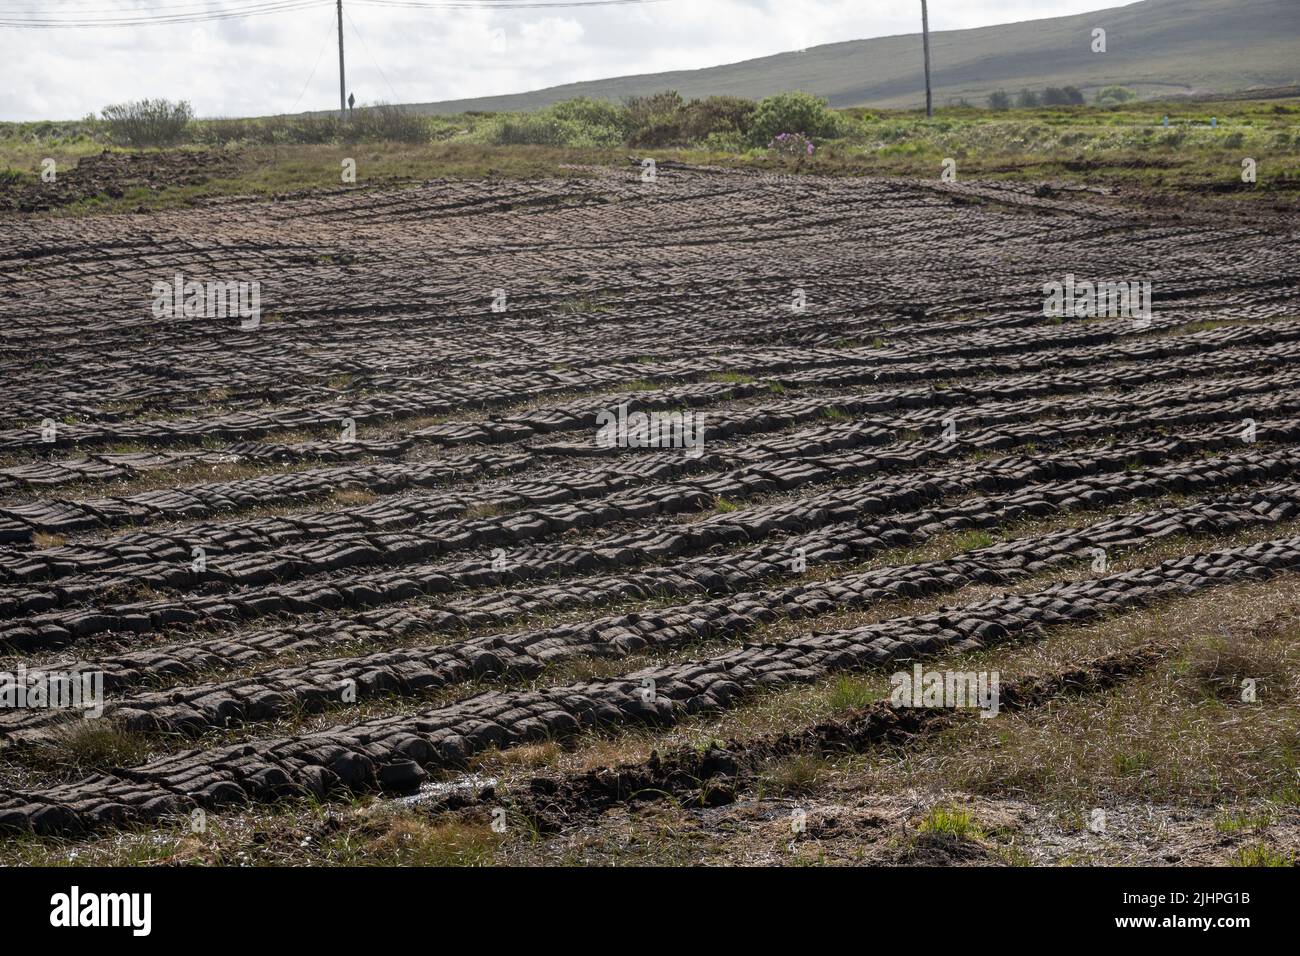 Peat drying in fields, Belmullet, Co. Mayo, Ireland Stock Photo